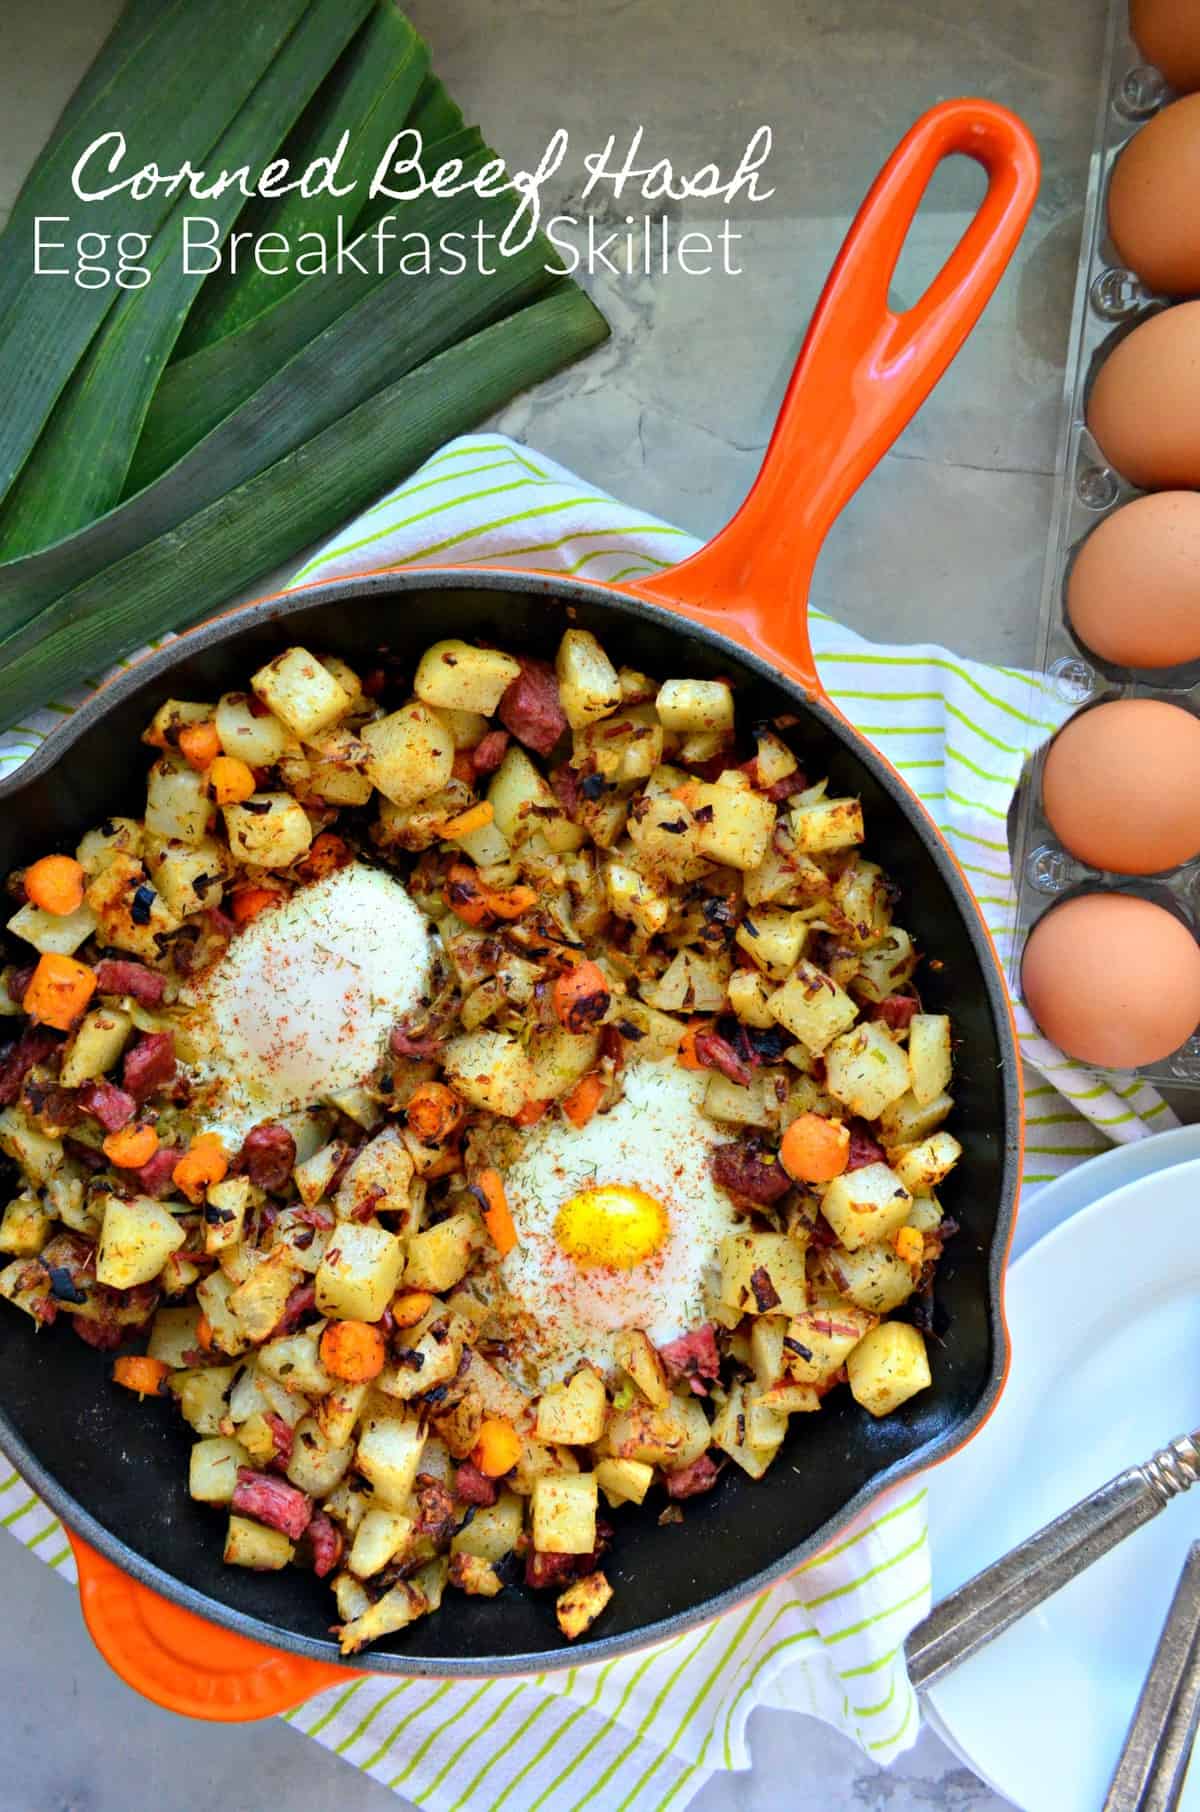 top view Corned Beef Hash in skillet with over easy eggs next to egg carton and fresh leek.